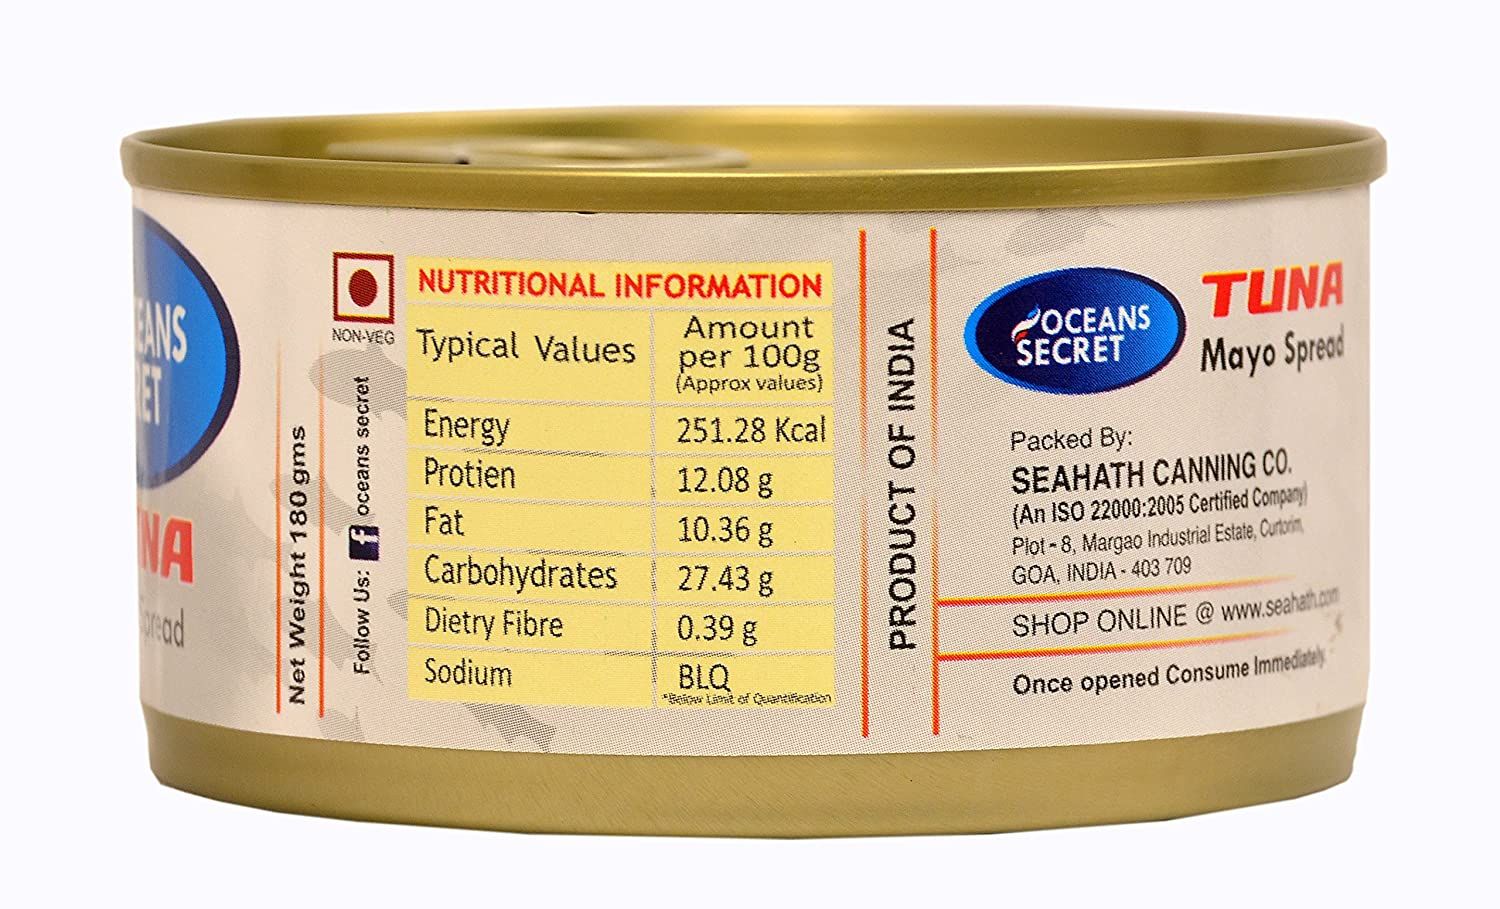 Ocean's Secret Canned Tuna in Mayonnaise Image